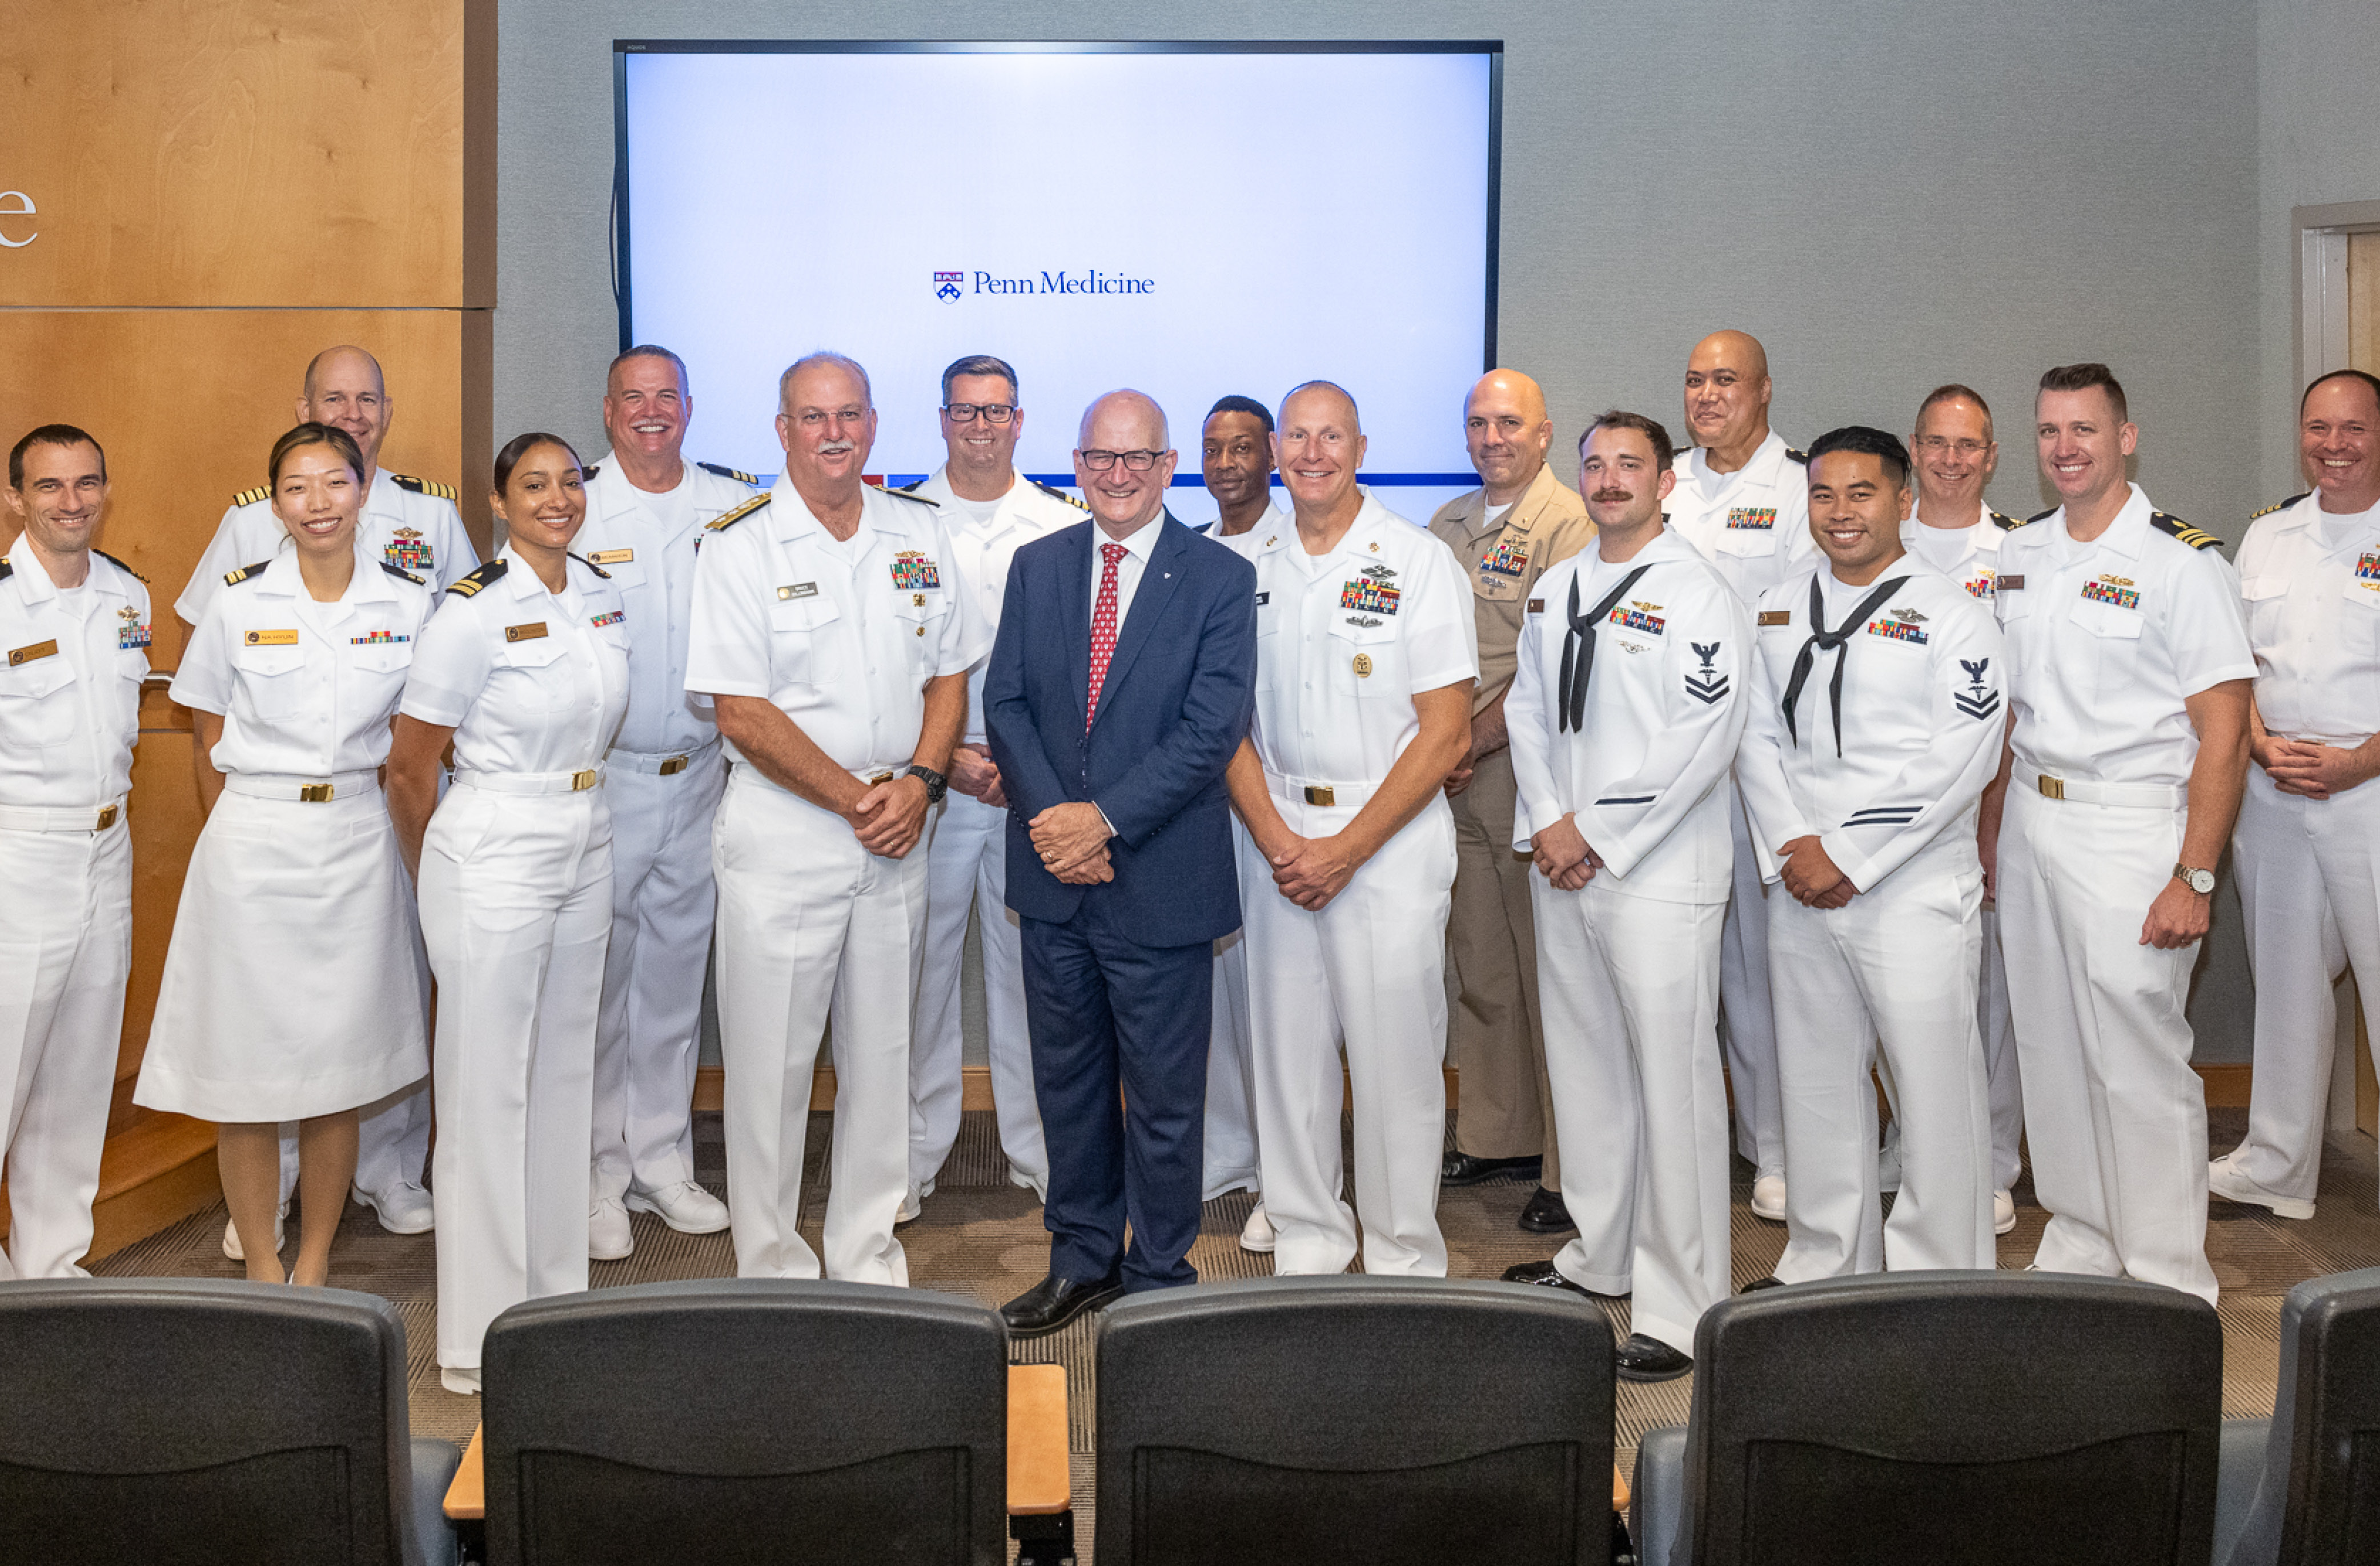 Kevin Mahoney with the full team from the US Navy who joined the PPMC staff 